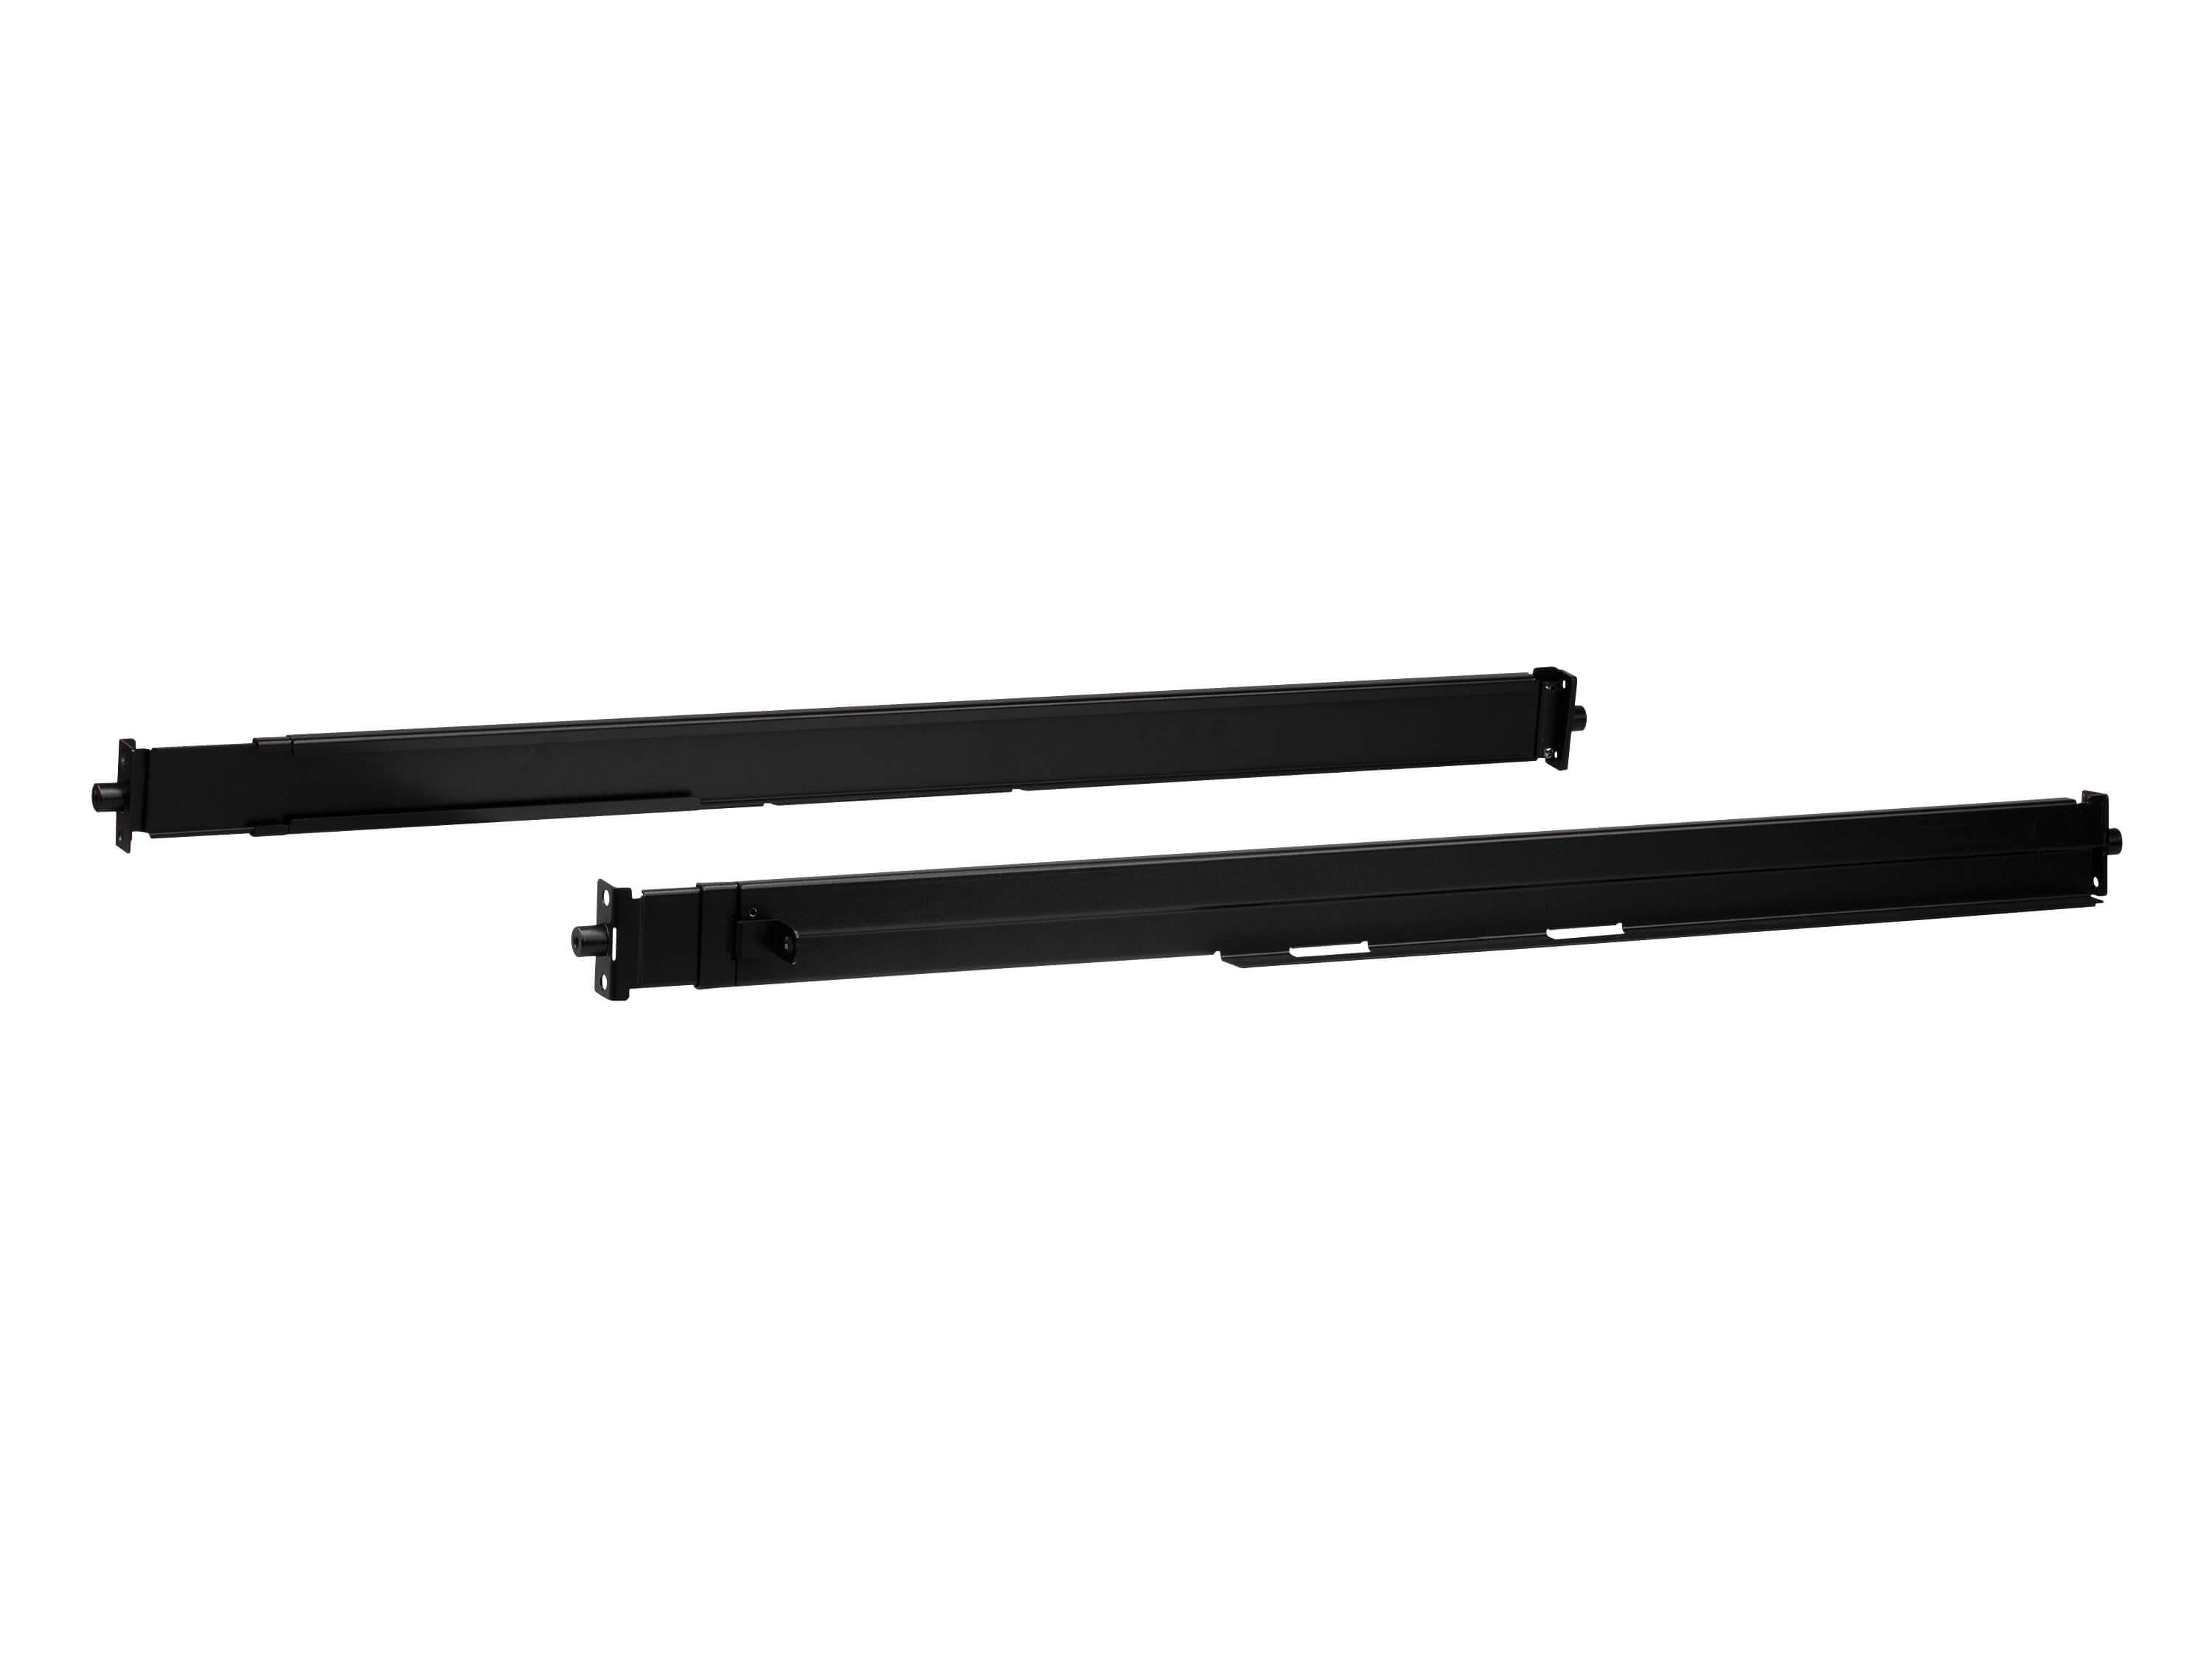 2K-0006 Easy Installation Rack Mount Kit (Long) for LCD KVM Switch/Console by Aten